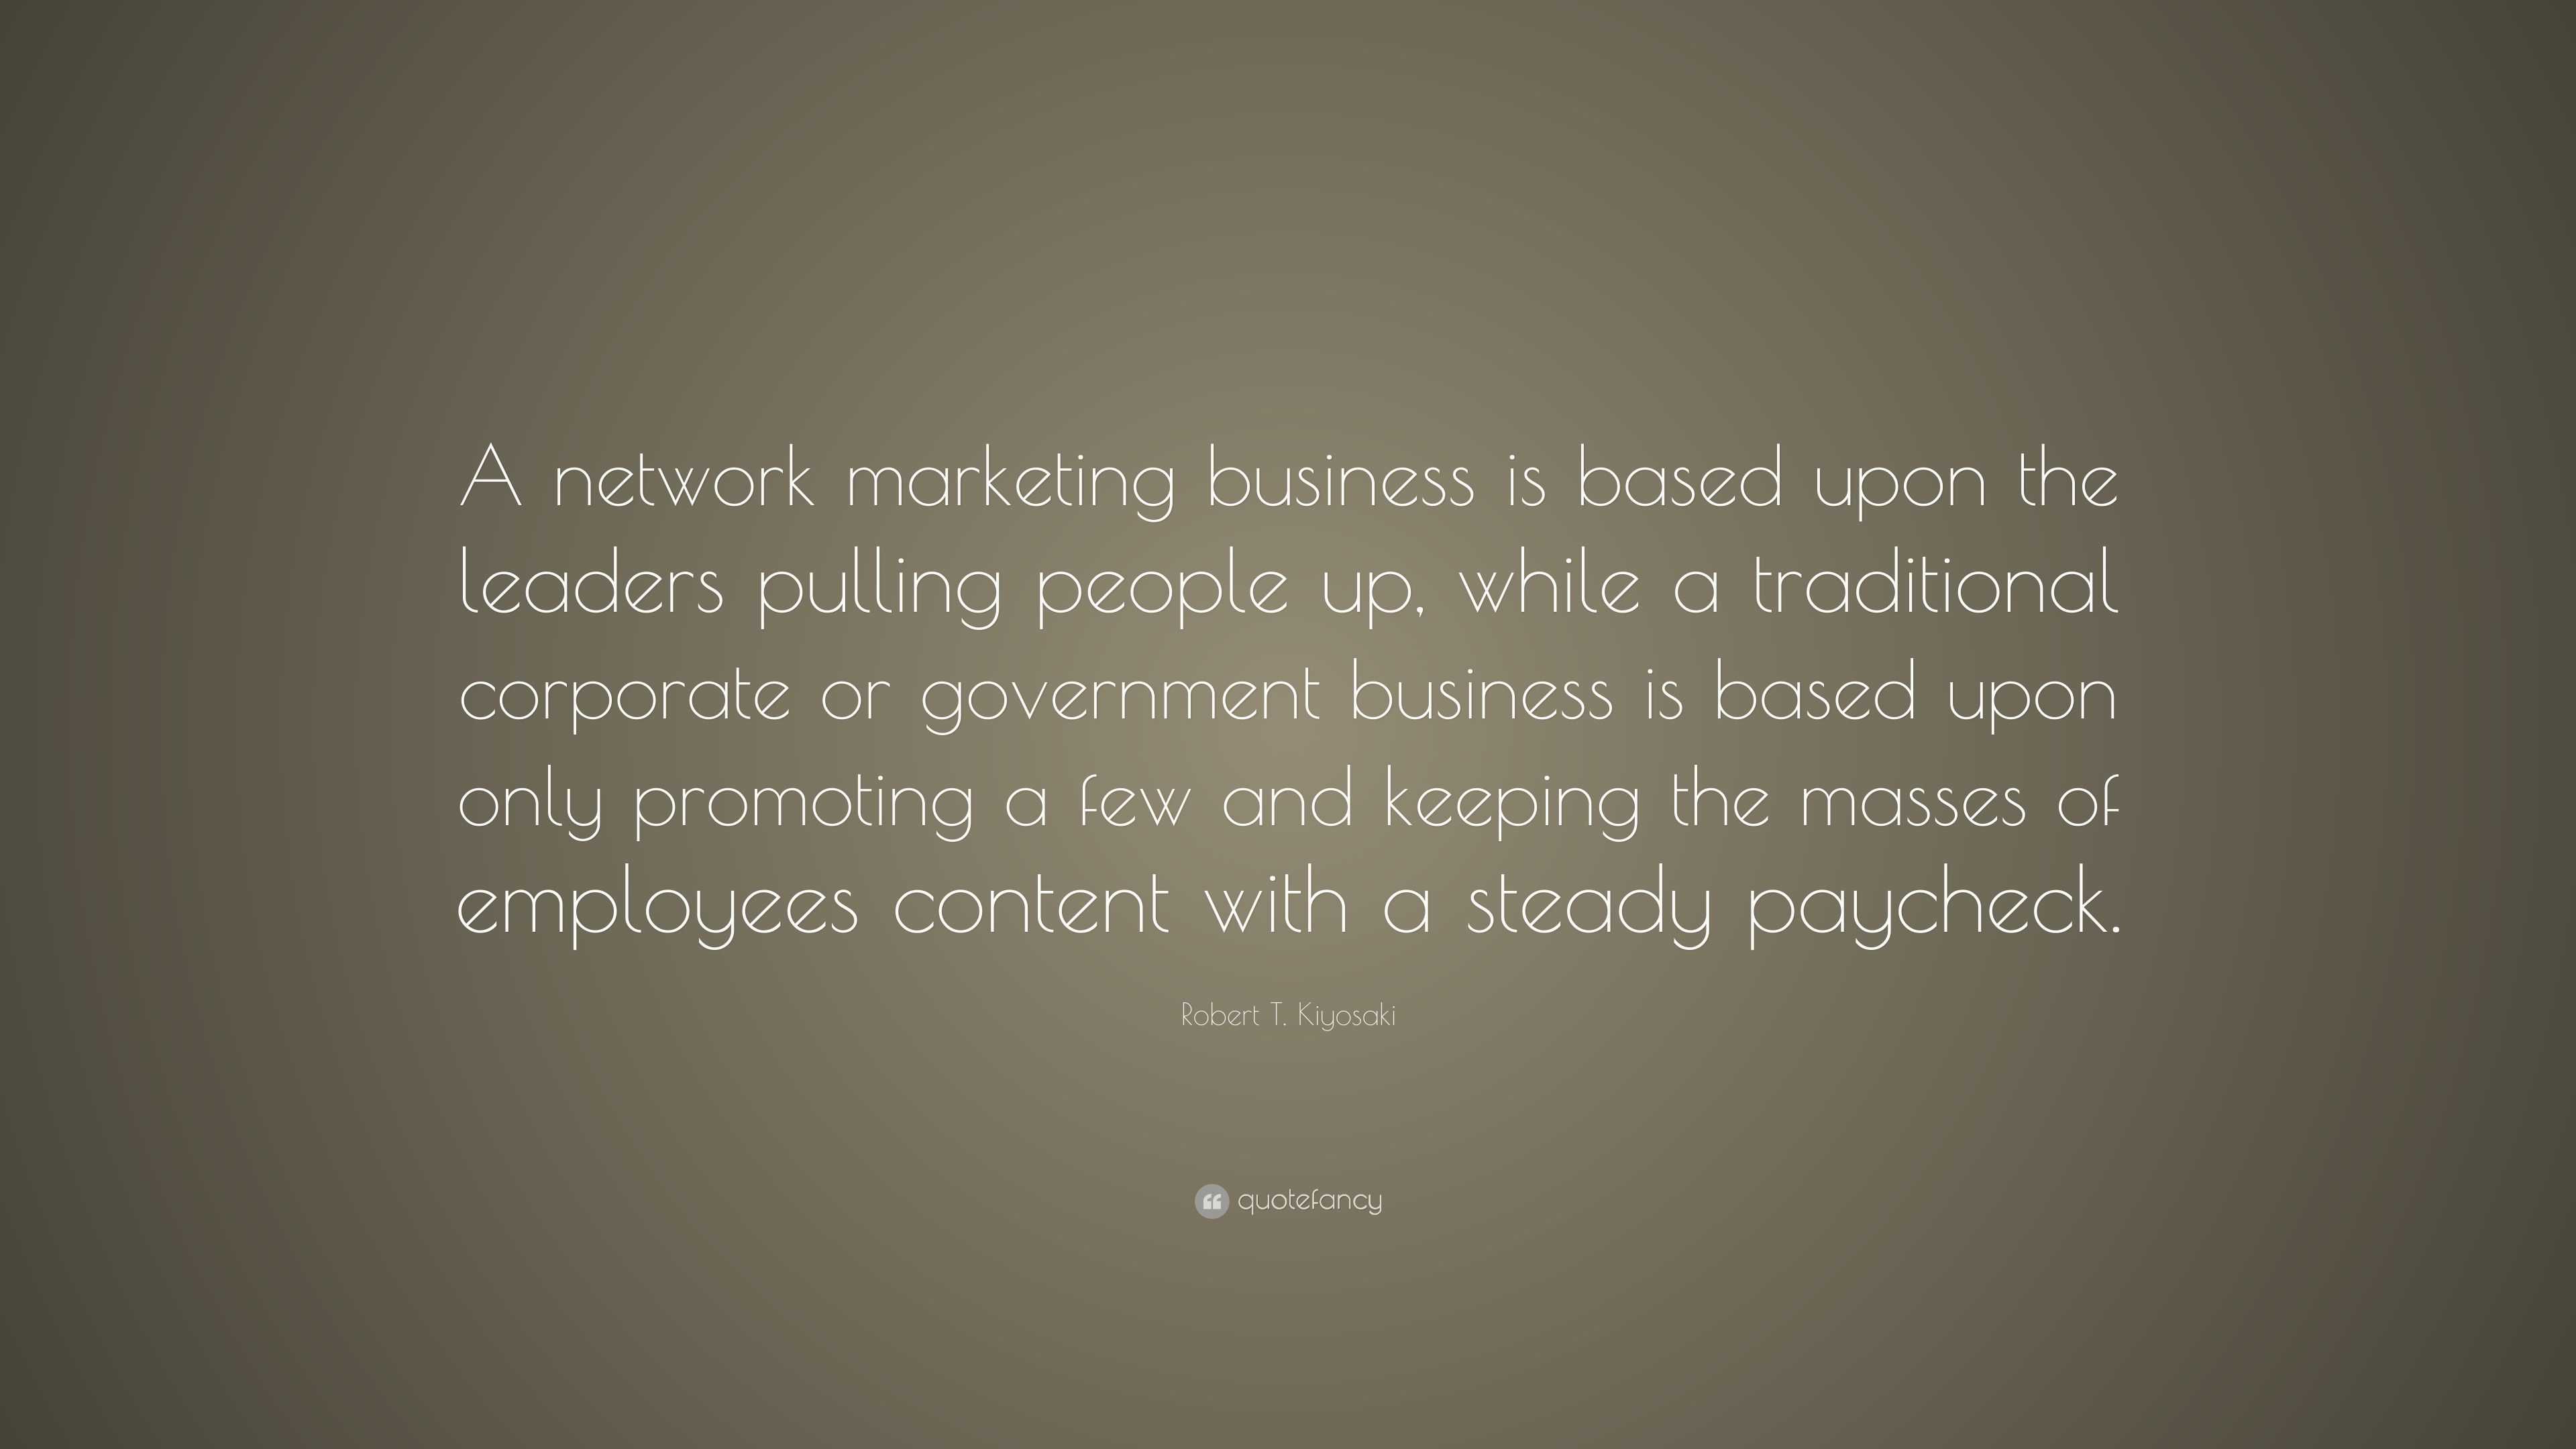 Robert T. Kiyosaki Quote: “A network marketing business is based upon ...